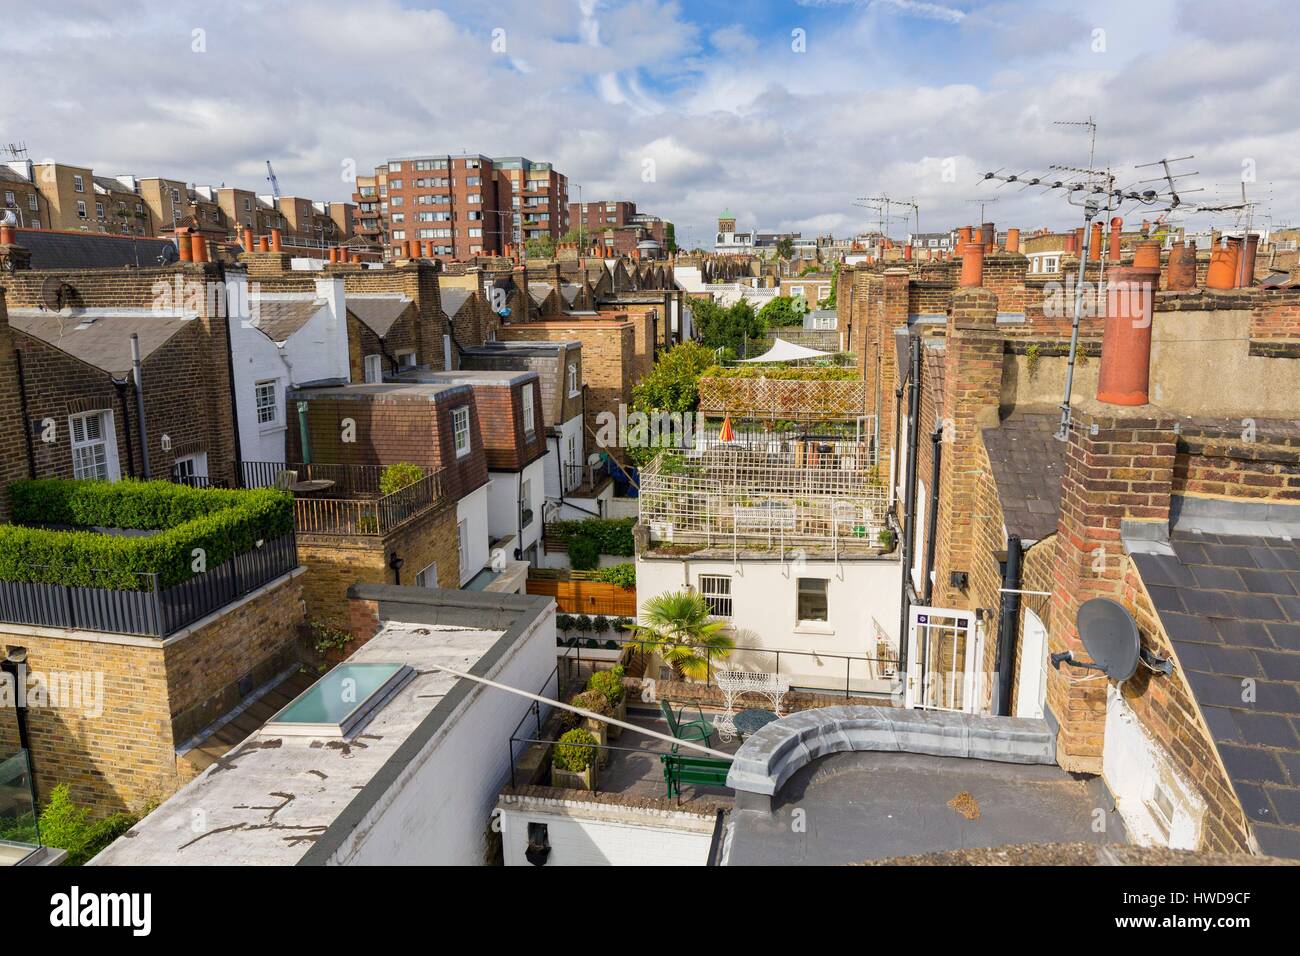 United Kingdom, London, Kensington district close to Notting Hill, roofs townhouses with outdoor patios upstairs Stock Photo